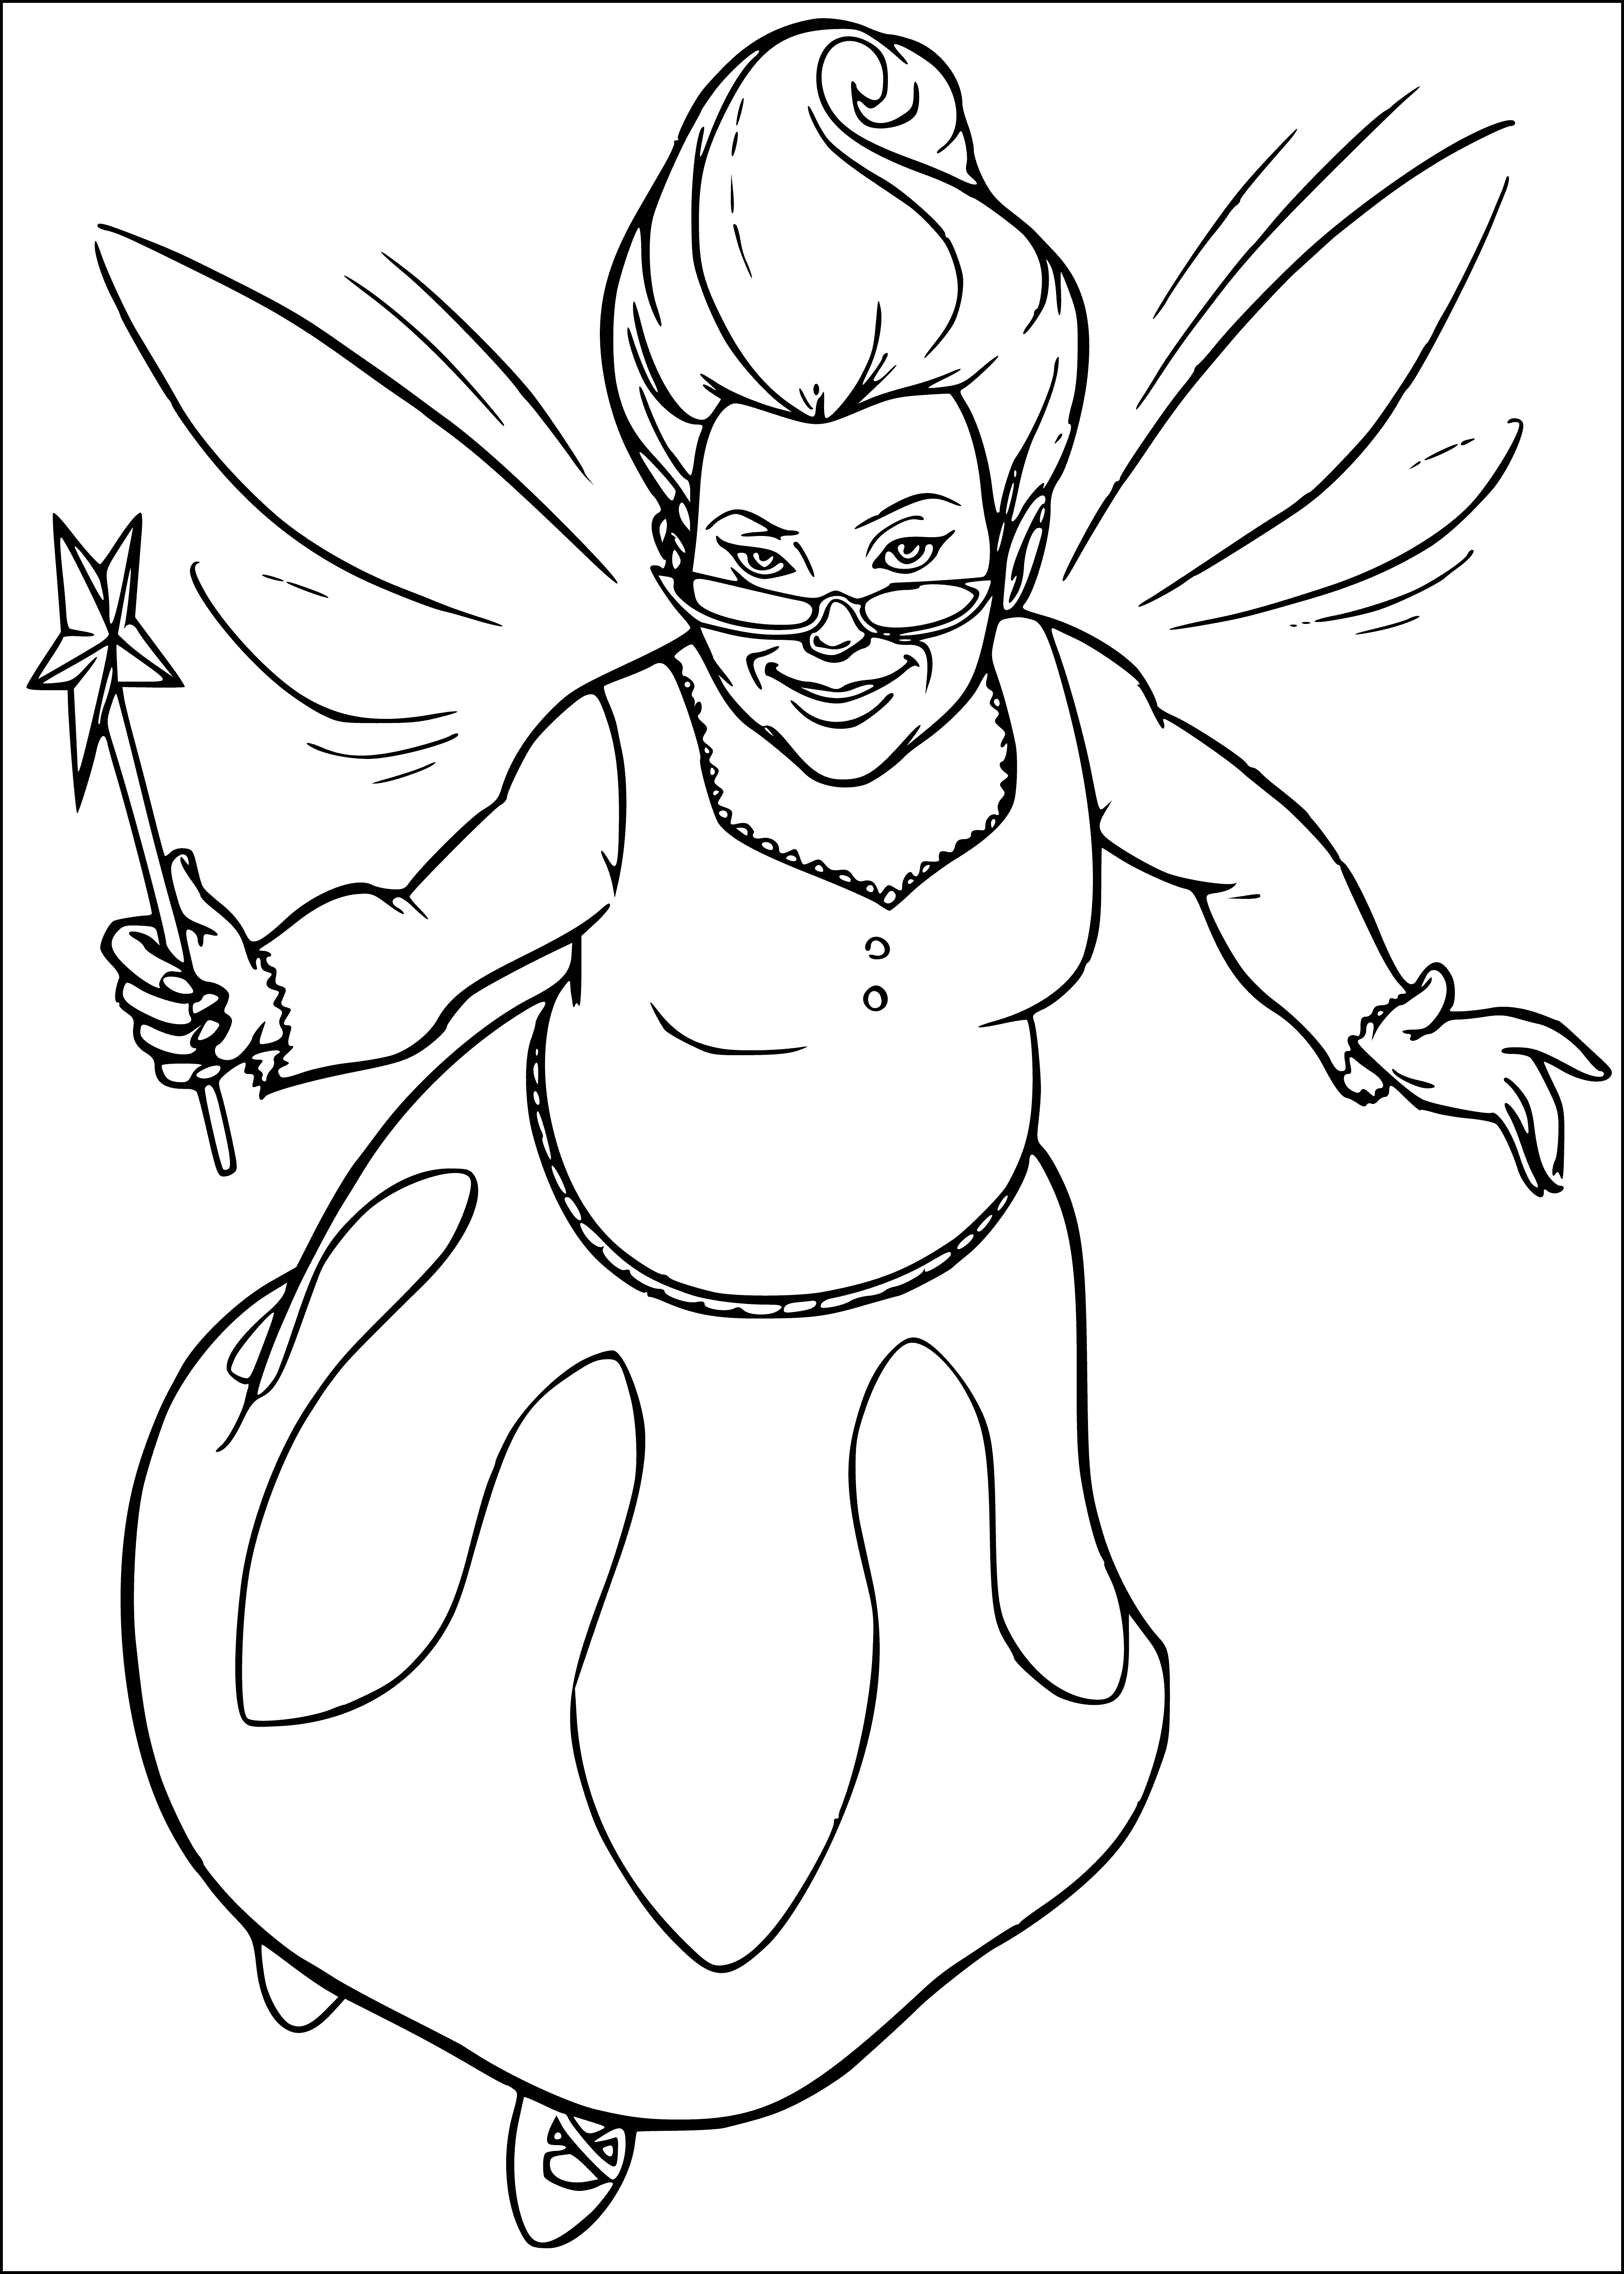 coloring page: The Fairy Godmother shows kindness, and always looks out for others with a big smile. Wearing a pink dress, she holds a wand and has her hair in a bun.